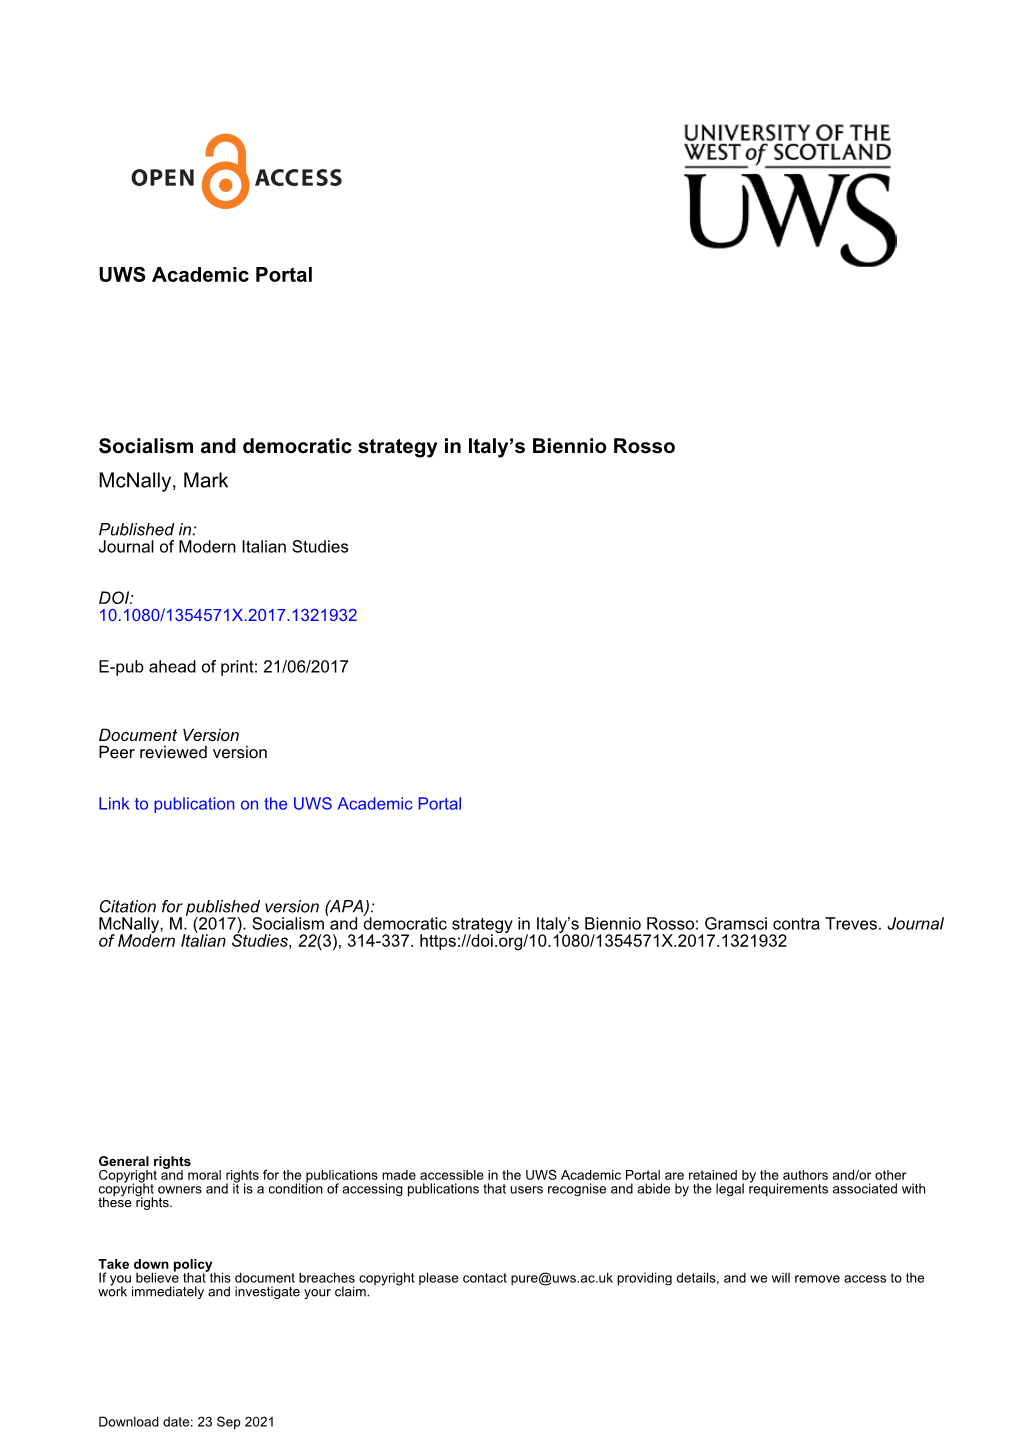 UWS Academic Portal Socialism and Democratic Strategy in Italy's Biennio Rosso Mcnally, Mark